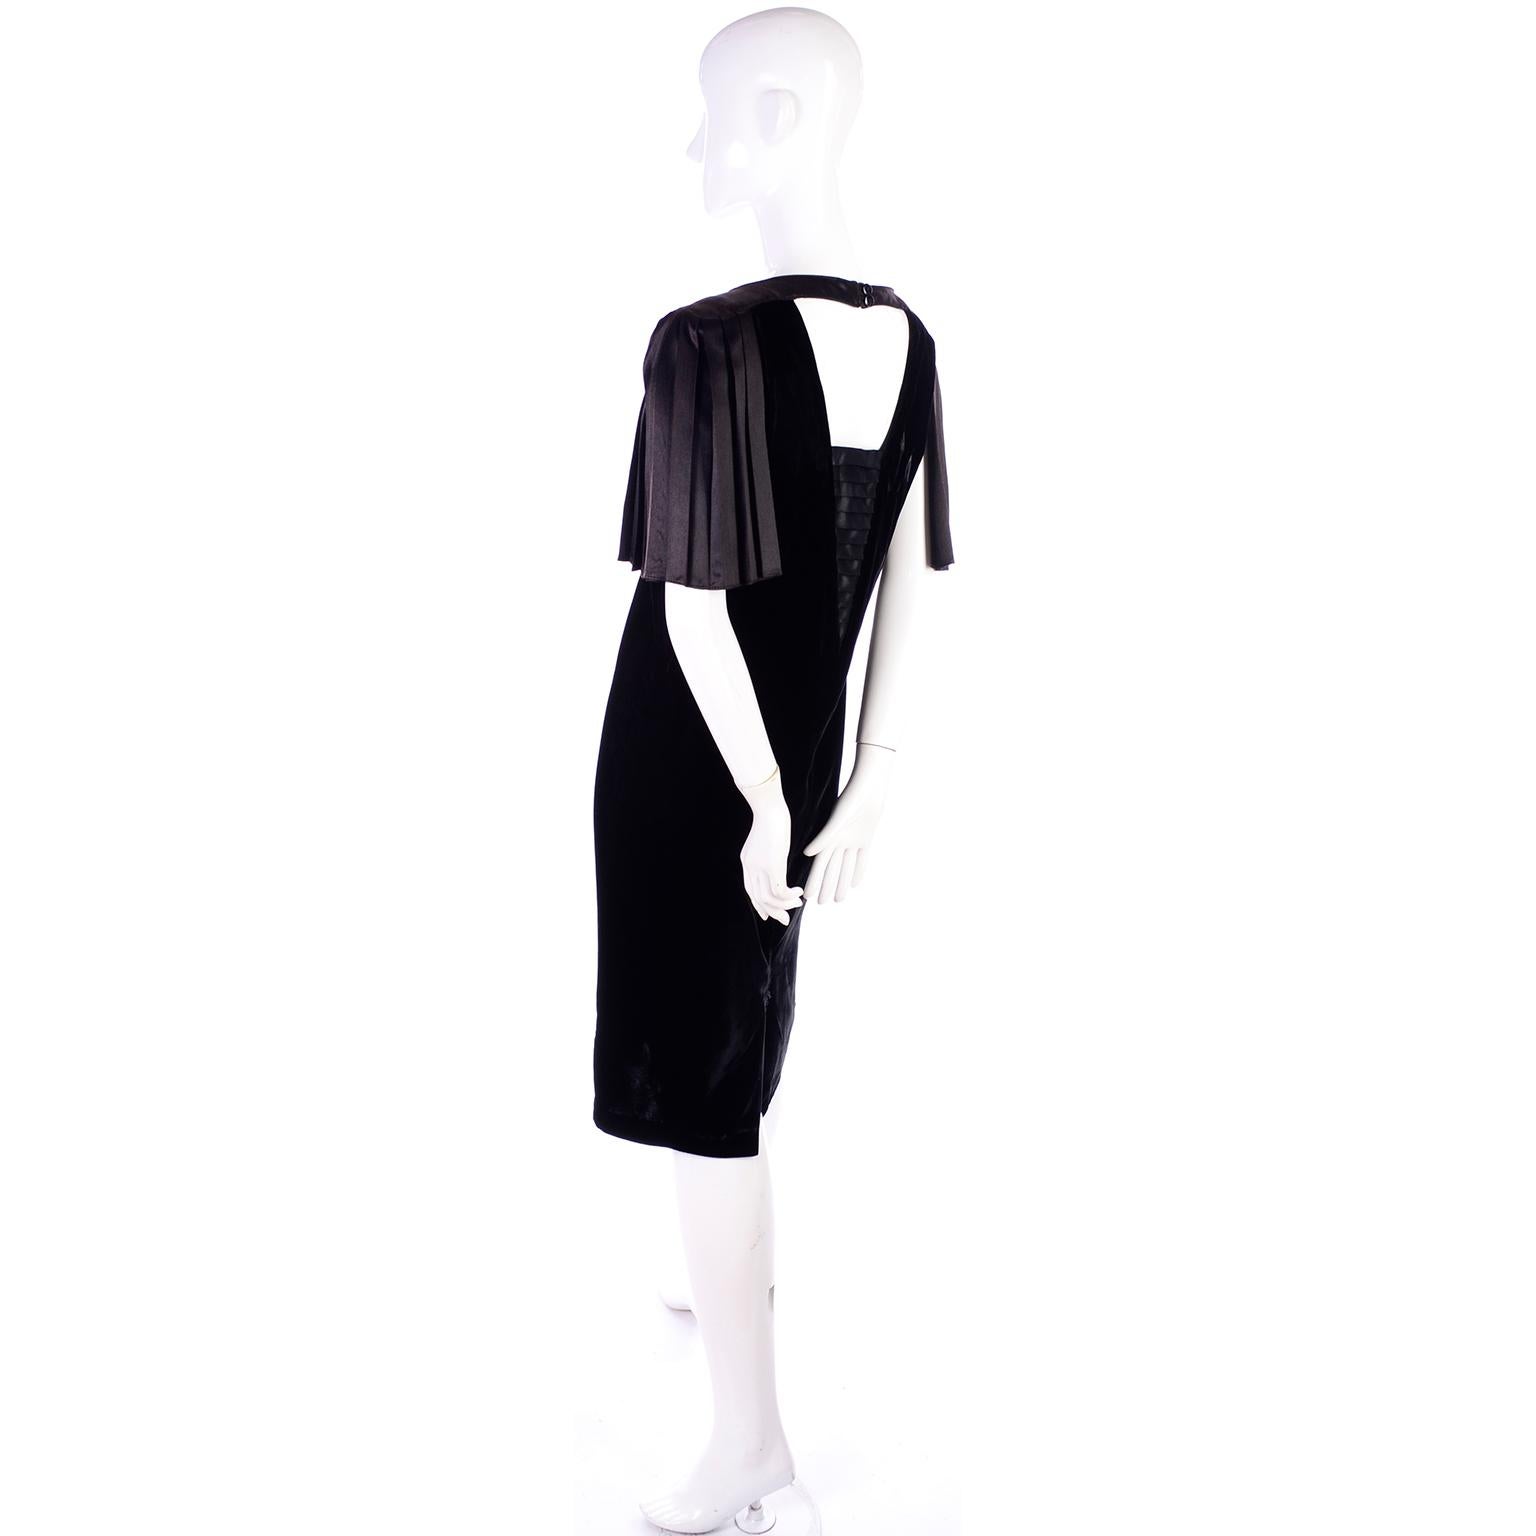 Gorgeous vintage 1980's black velvet dress with satin pleated sleeves and satin trim! It has satin shoulders that lead to pleated sleeves that are only attached at the shoulder! The back closes with a button on a satin strip at the top, but is a